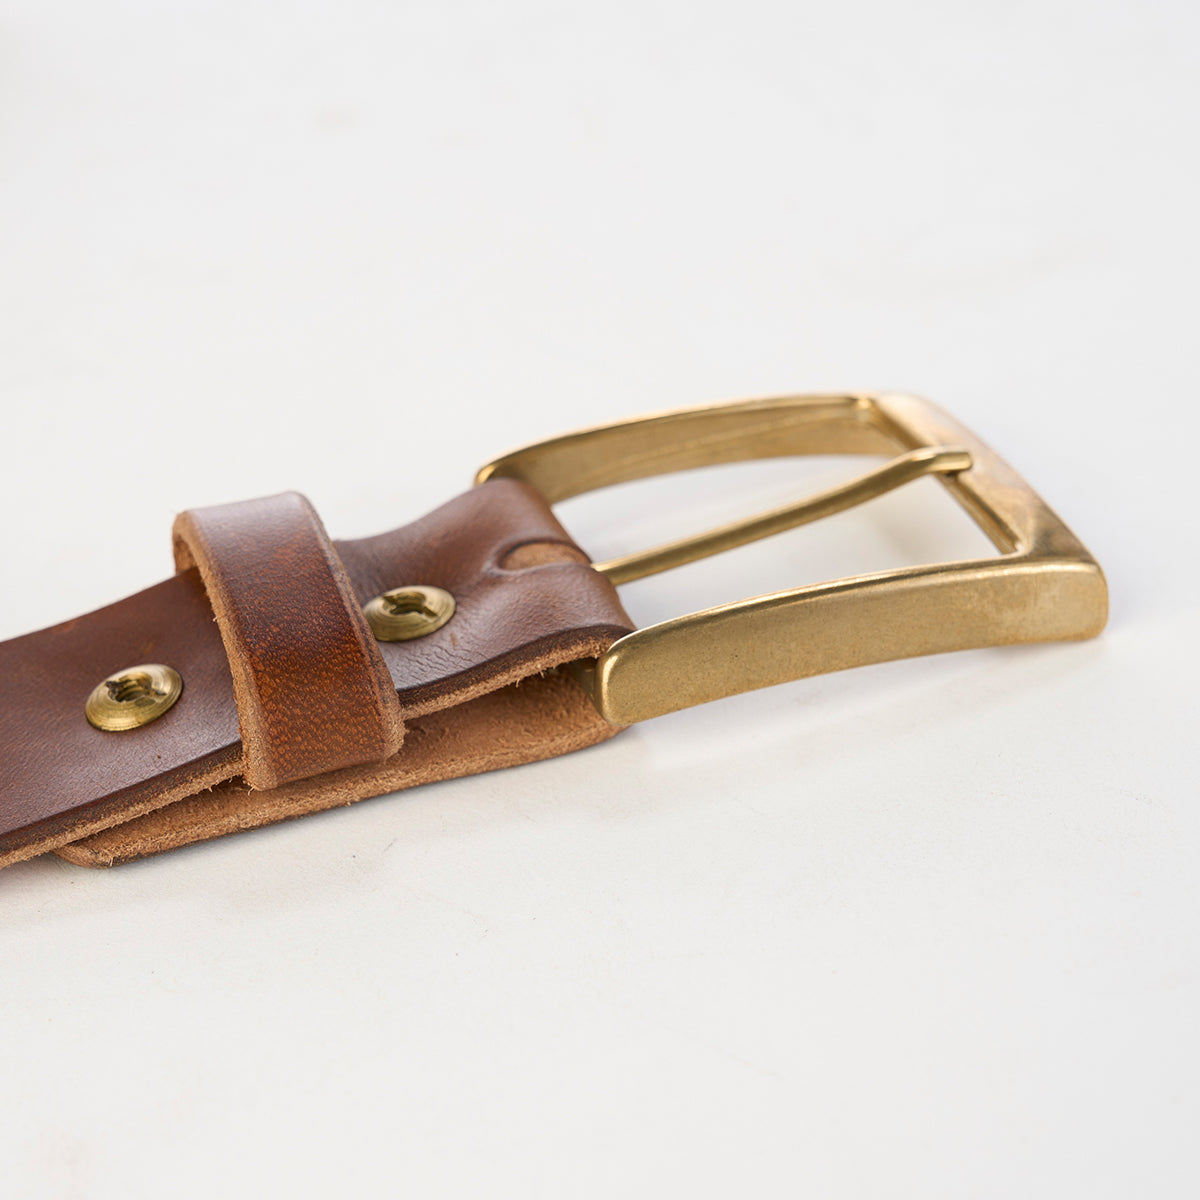 Vegetable Tanned Leather - A Classic with Infinite Uses